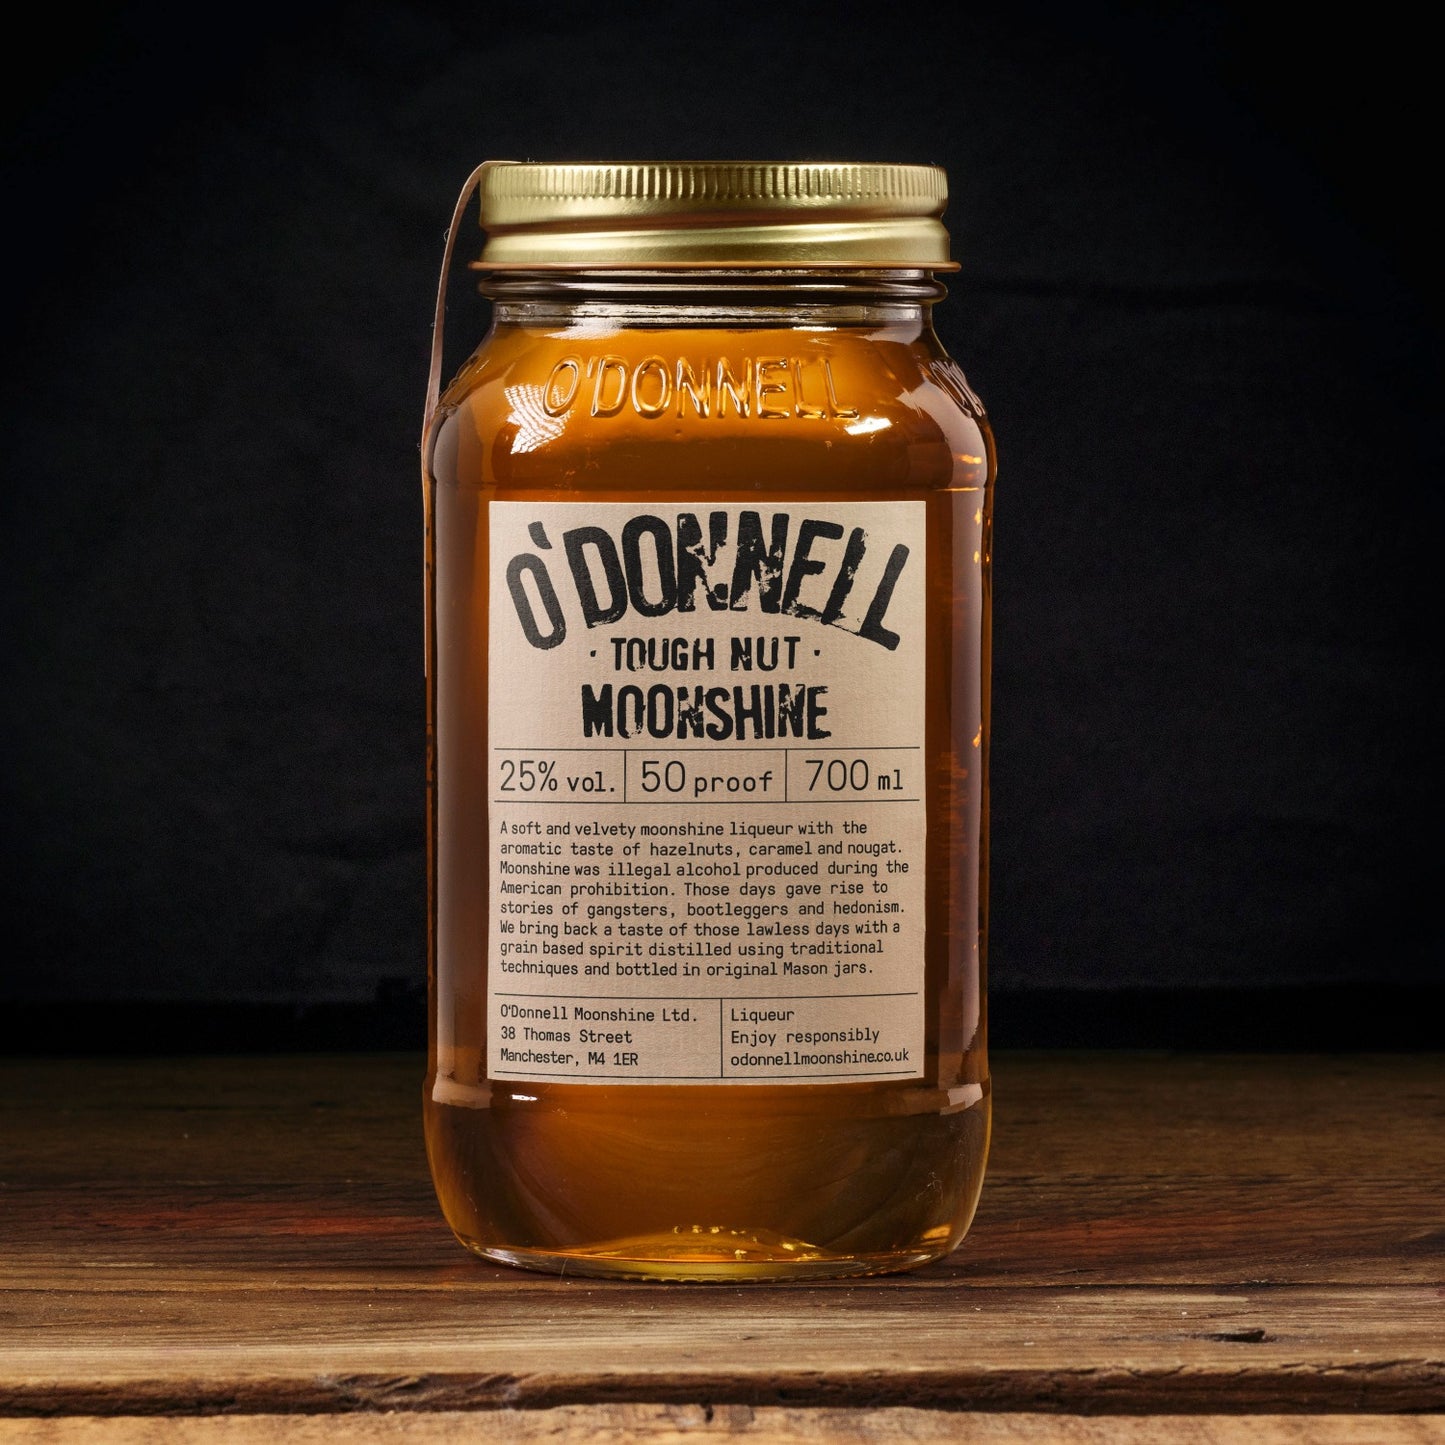 O Donnell Moonshine Tough Nut